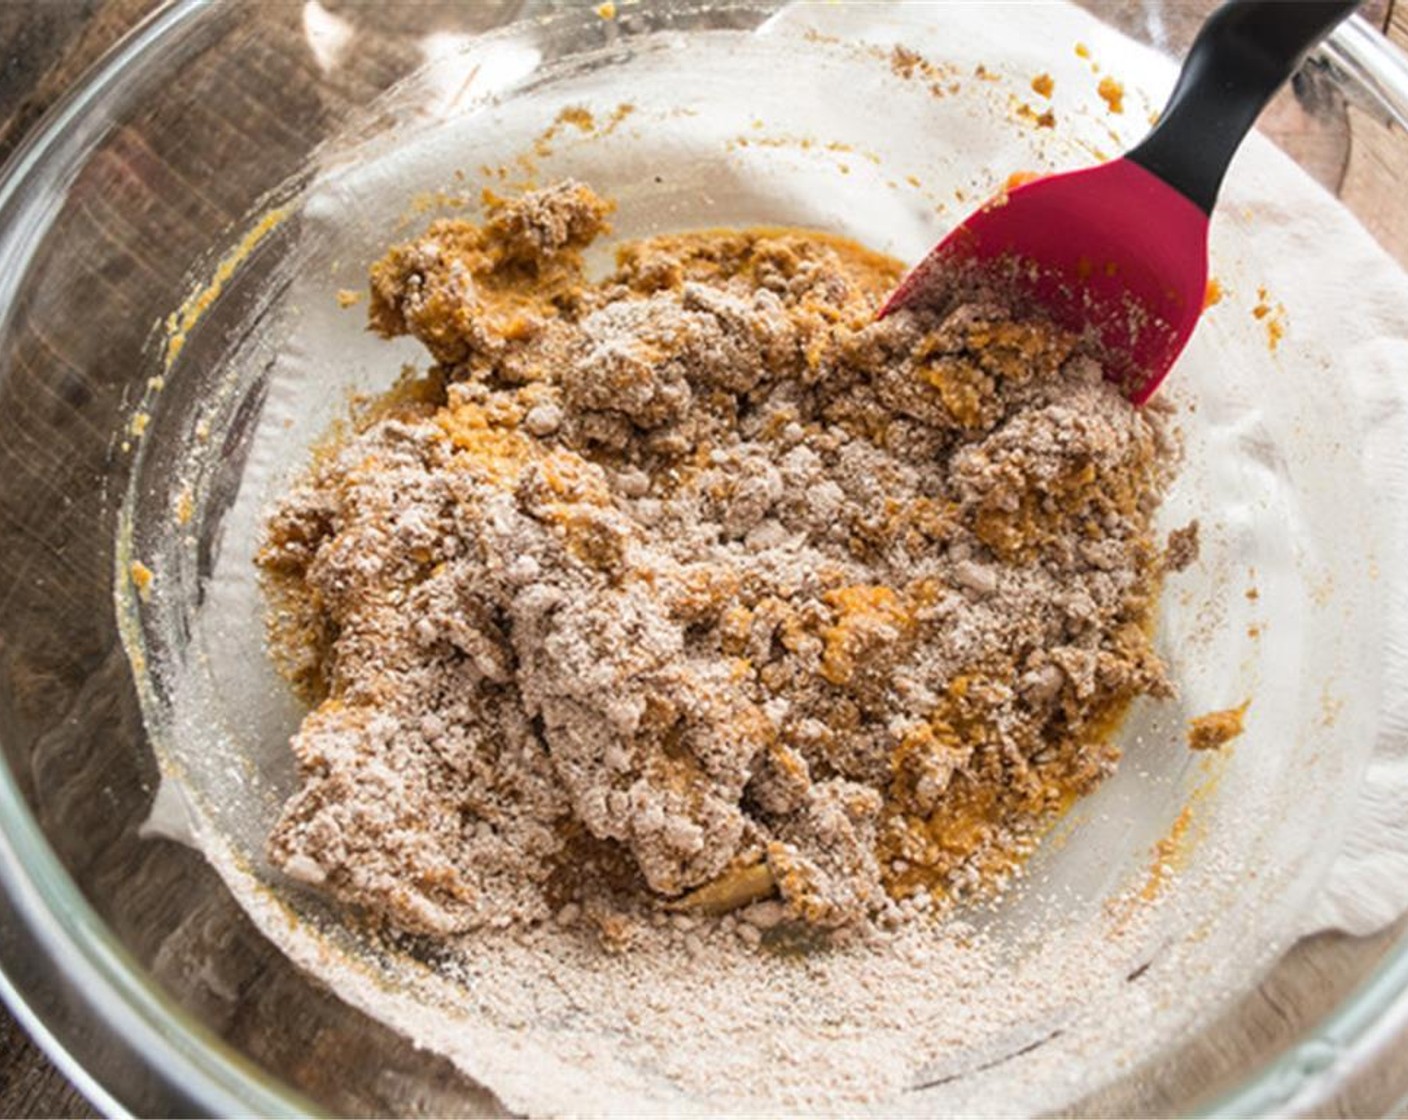 step 4 Add oat flour and ground cashew meal to a separate bowl, along with Baking Powder (1 tsp), Honey (1/3 cup), Baking Soda (1/2 Tbsp), Pumpkin Pie Spice (1 Tbsp), Ground Cinnamon (1/2 tsp), and Sea Salt (1/2 tsp). Whisk to combine all ingredients.